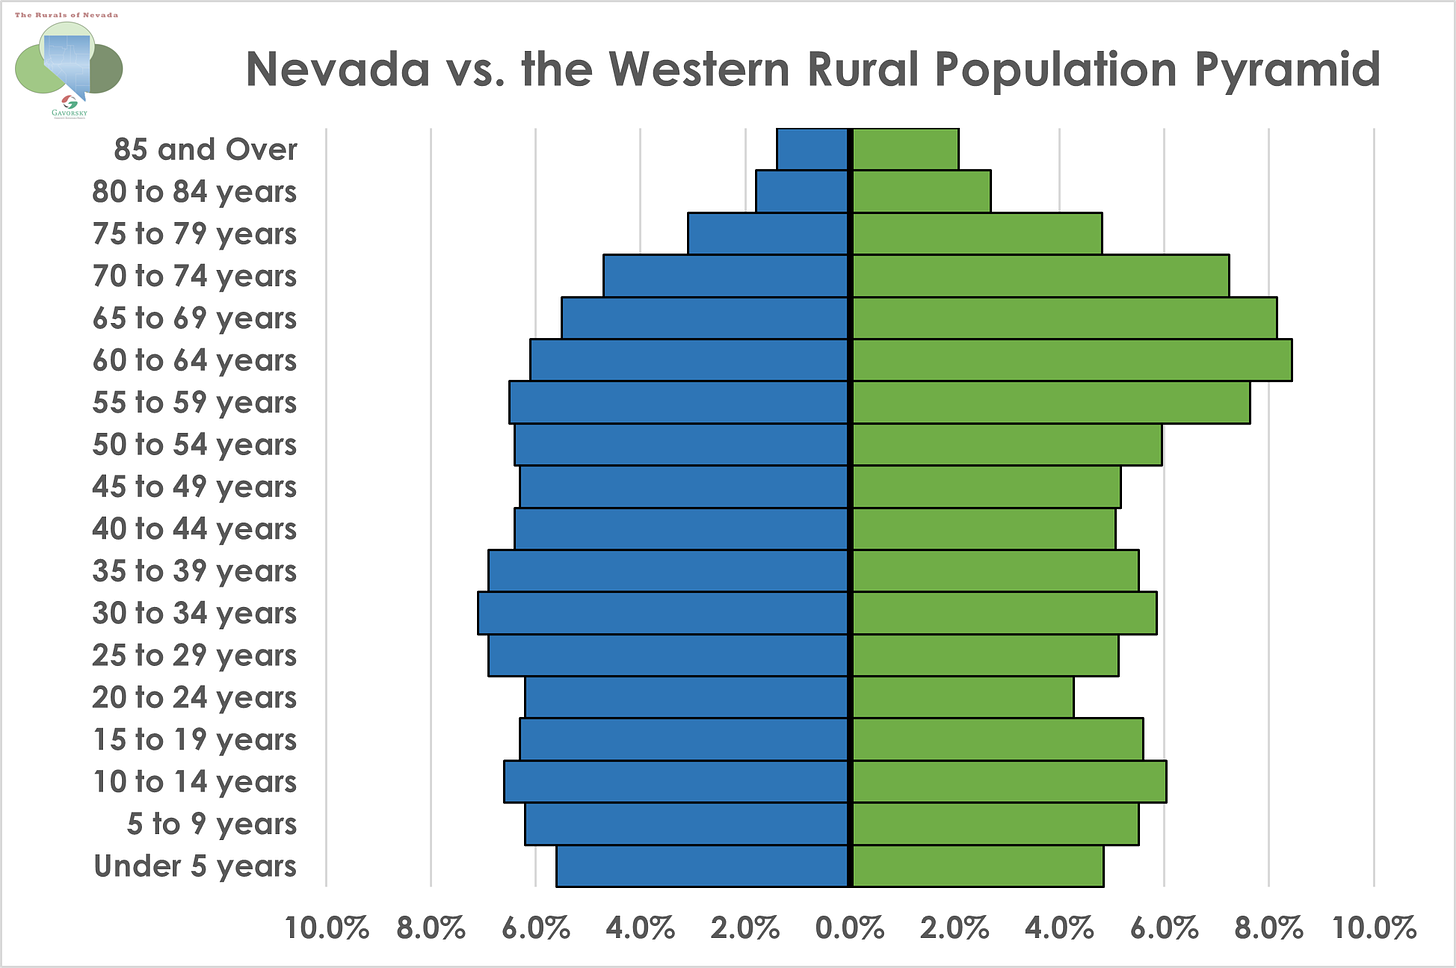 Population Pyramid comparing state of Nevada on left and the Western Rural region on right based on 2020 Census. Discussion is given below.